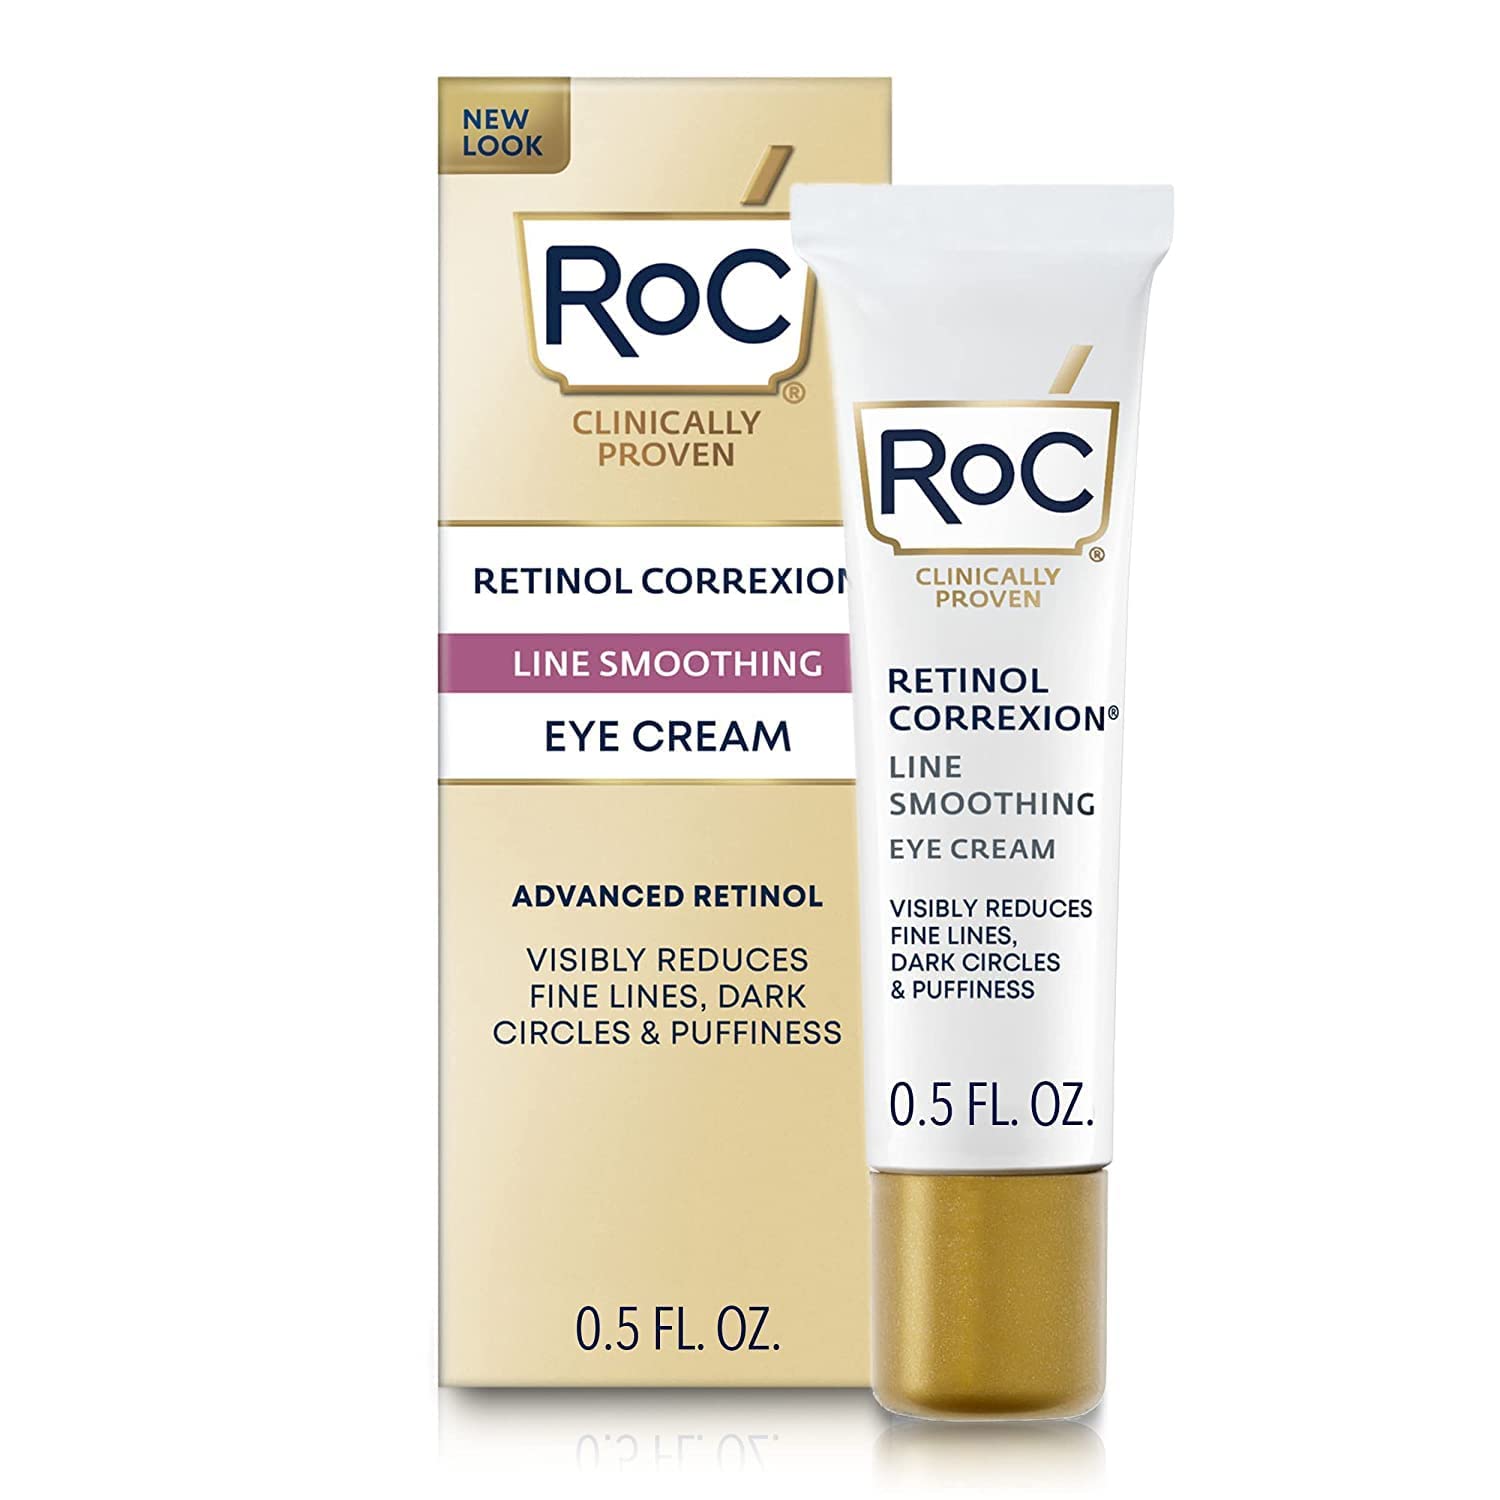 

RoC Retinol Correxion Under Eye Cream for Dark Circles & Puffiness, Daily Wrinkle Cream, Anti Aging Line Smoothing Skin Care Treatment 0.5 oz